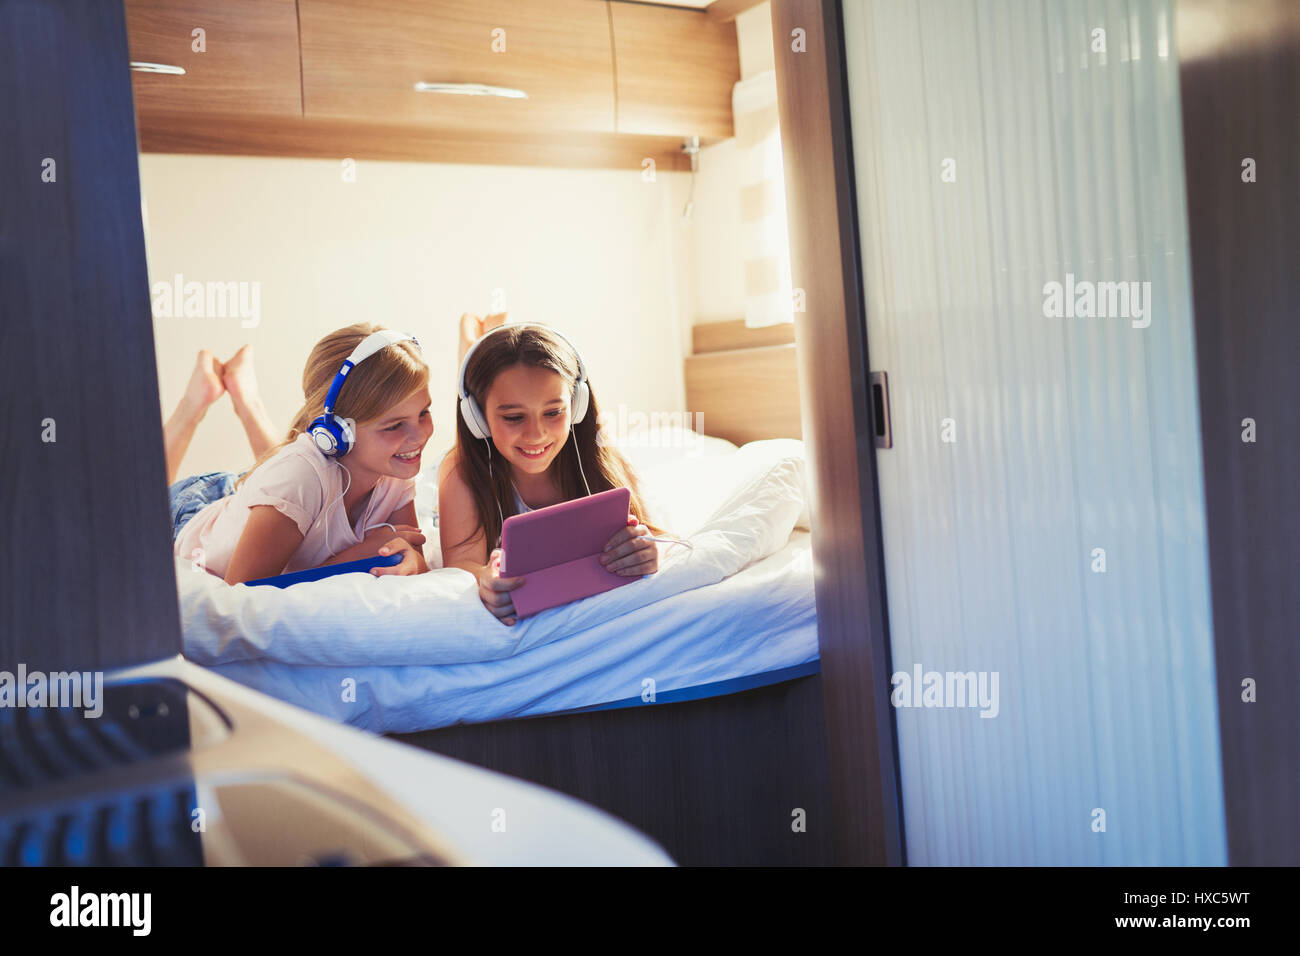 Sisters with headphones sharing digital tablet, watching video inside motor home Stock Photo